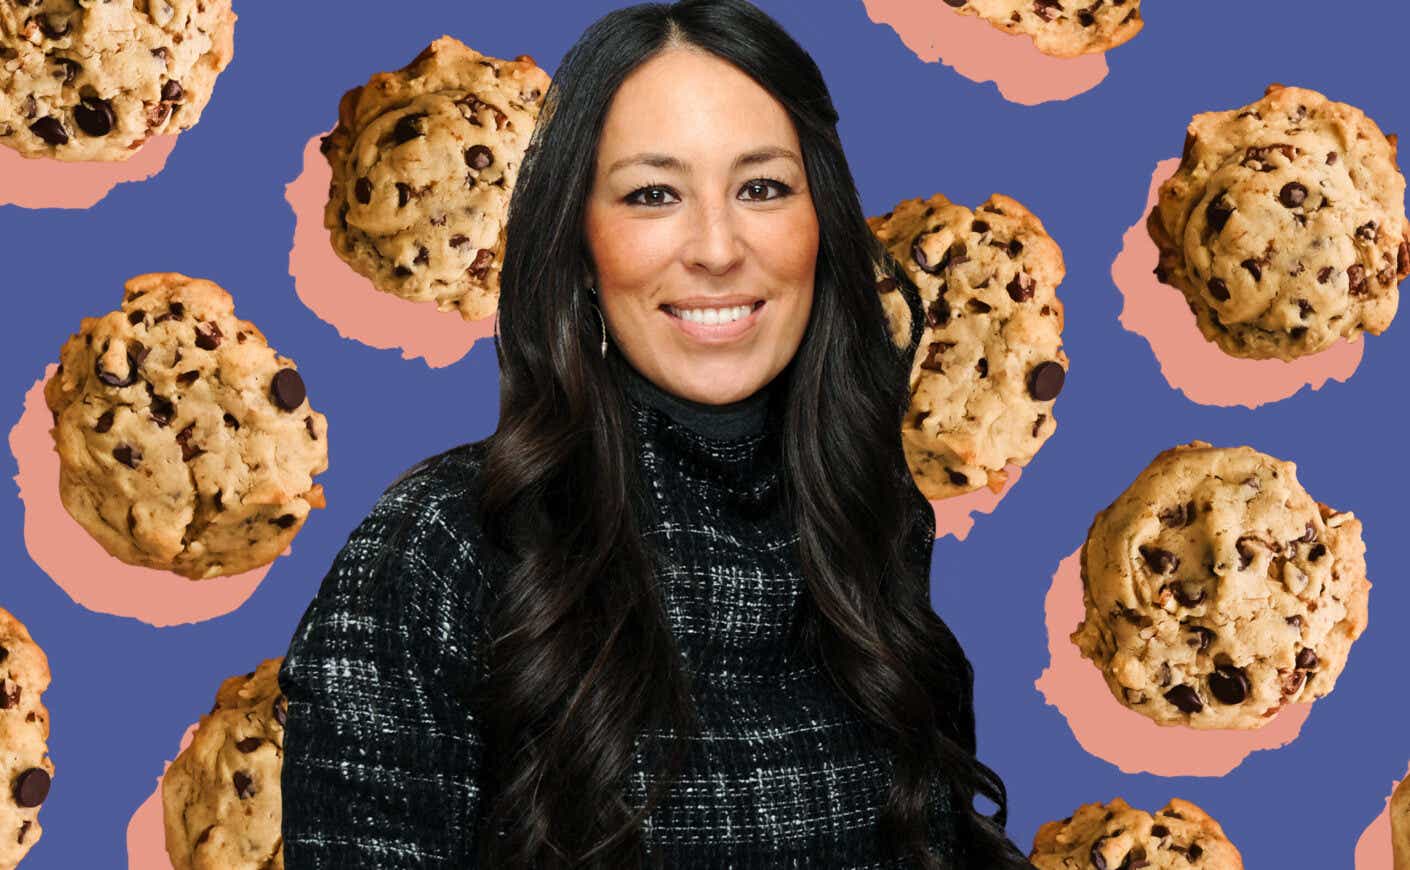 Joanna Gaines' smiles as a collage of cookies floats behind her head.